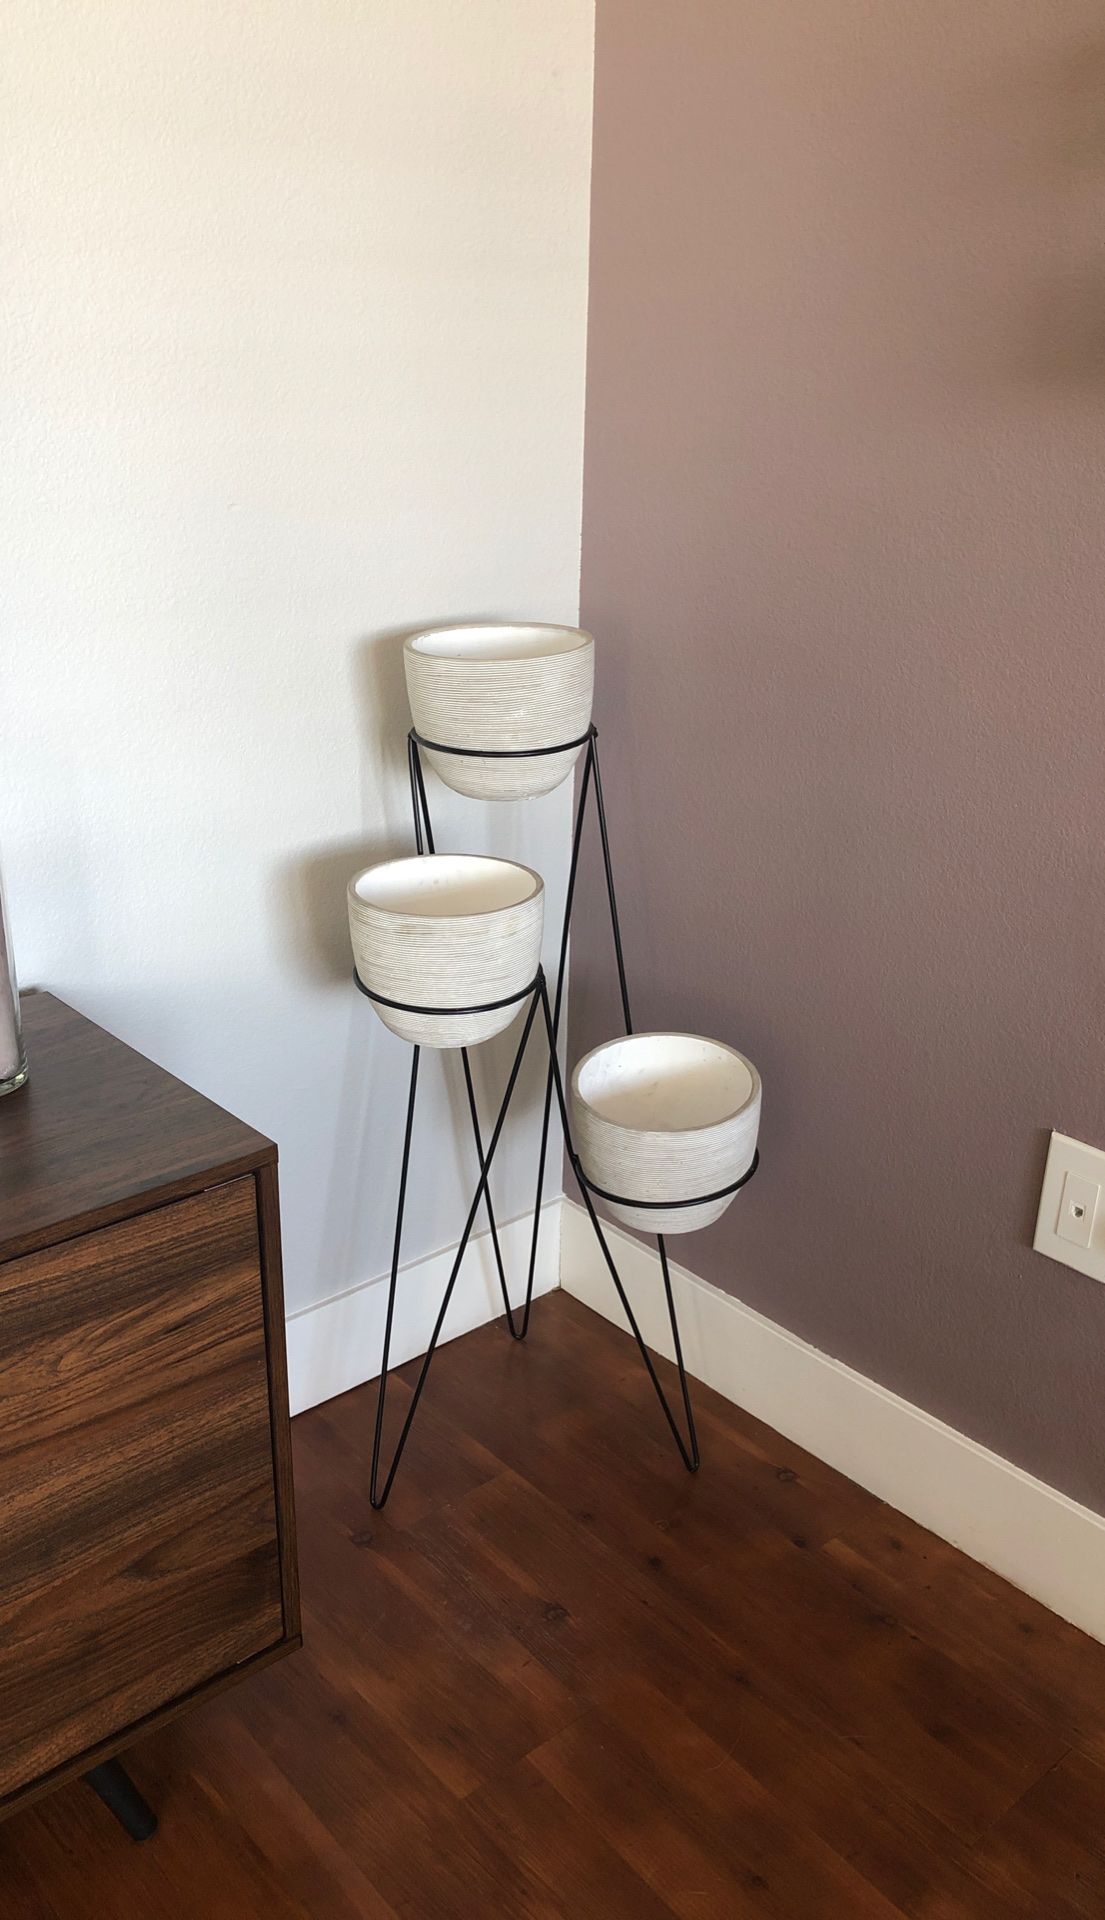 Adorable 3 tier plant stand